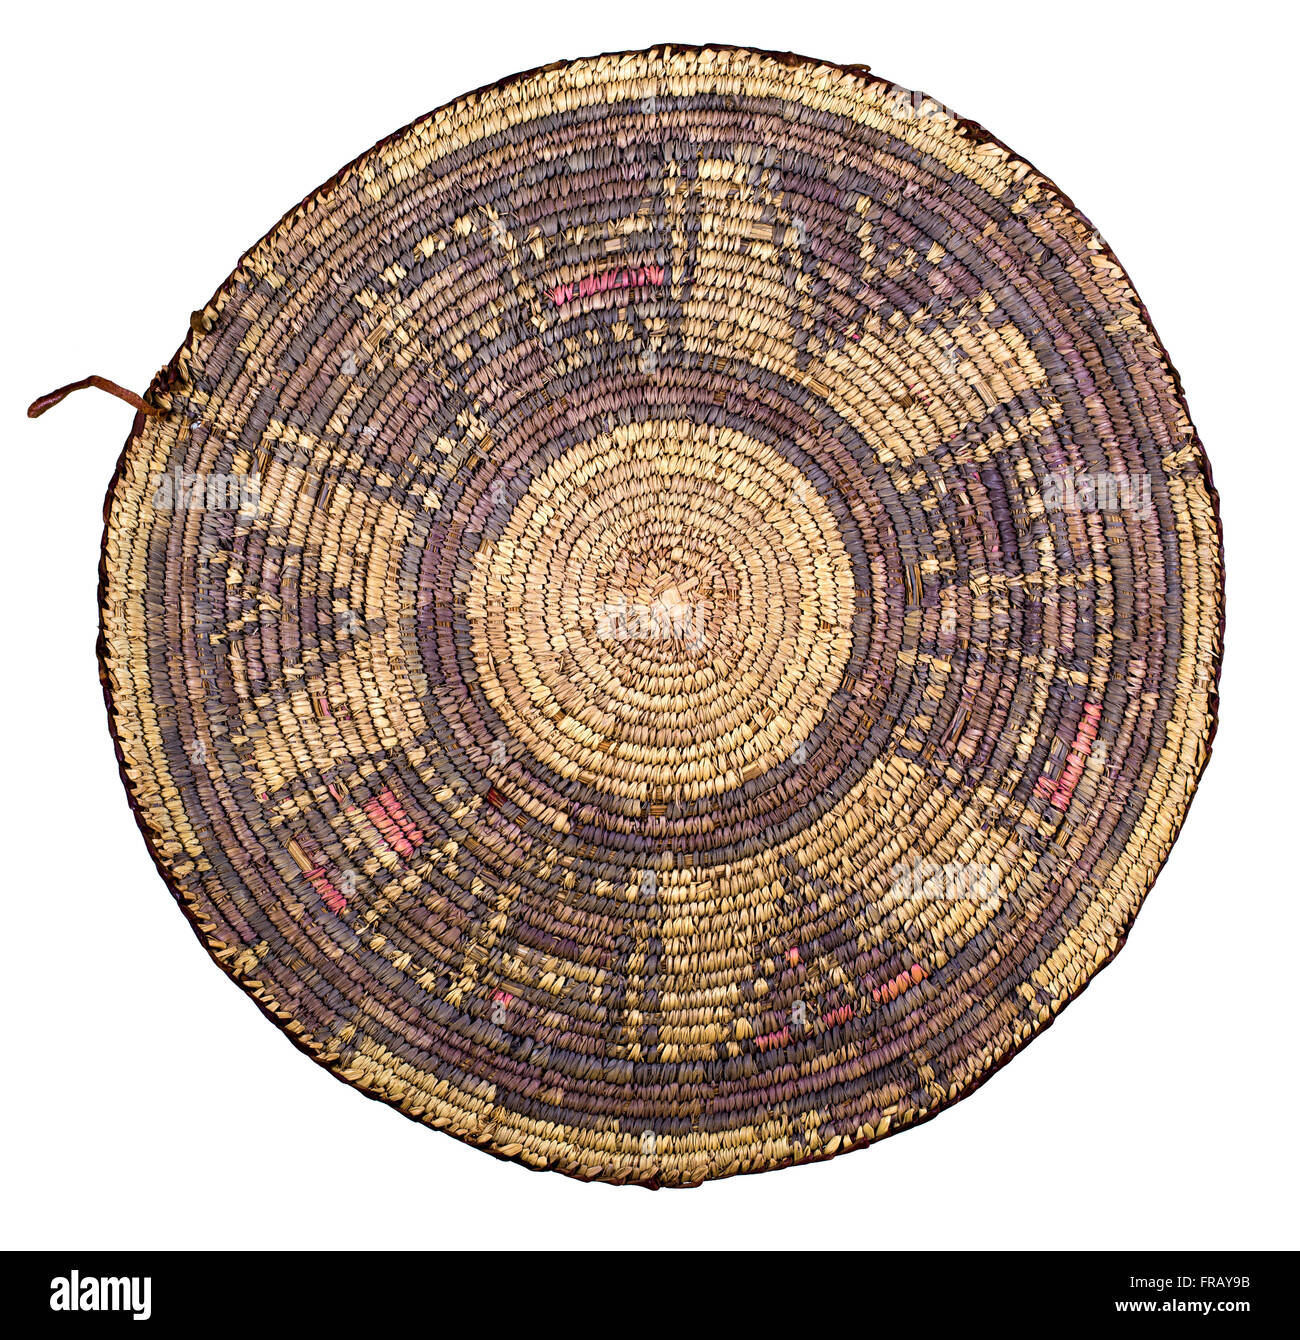 A studio photo of a shallow woven Egyptian basket used for wind winnowing grain Stock Photo